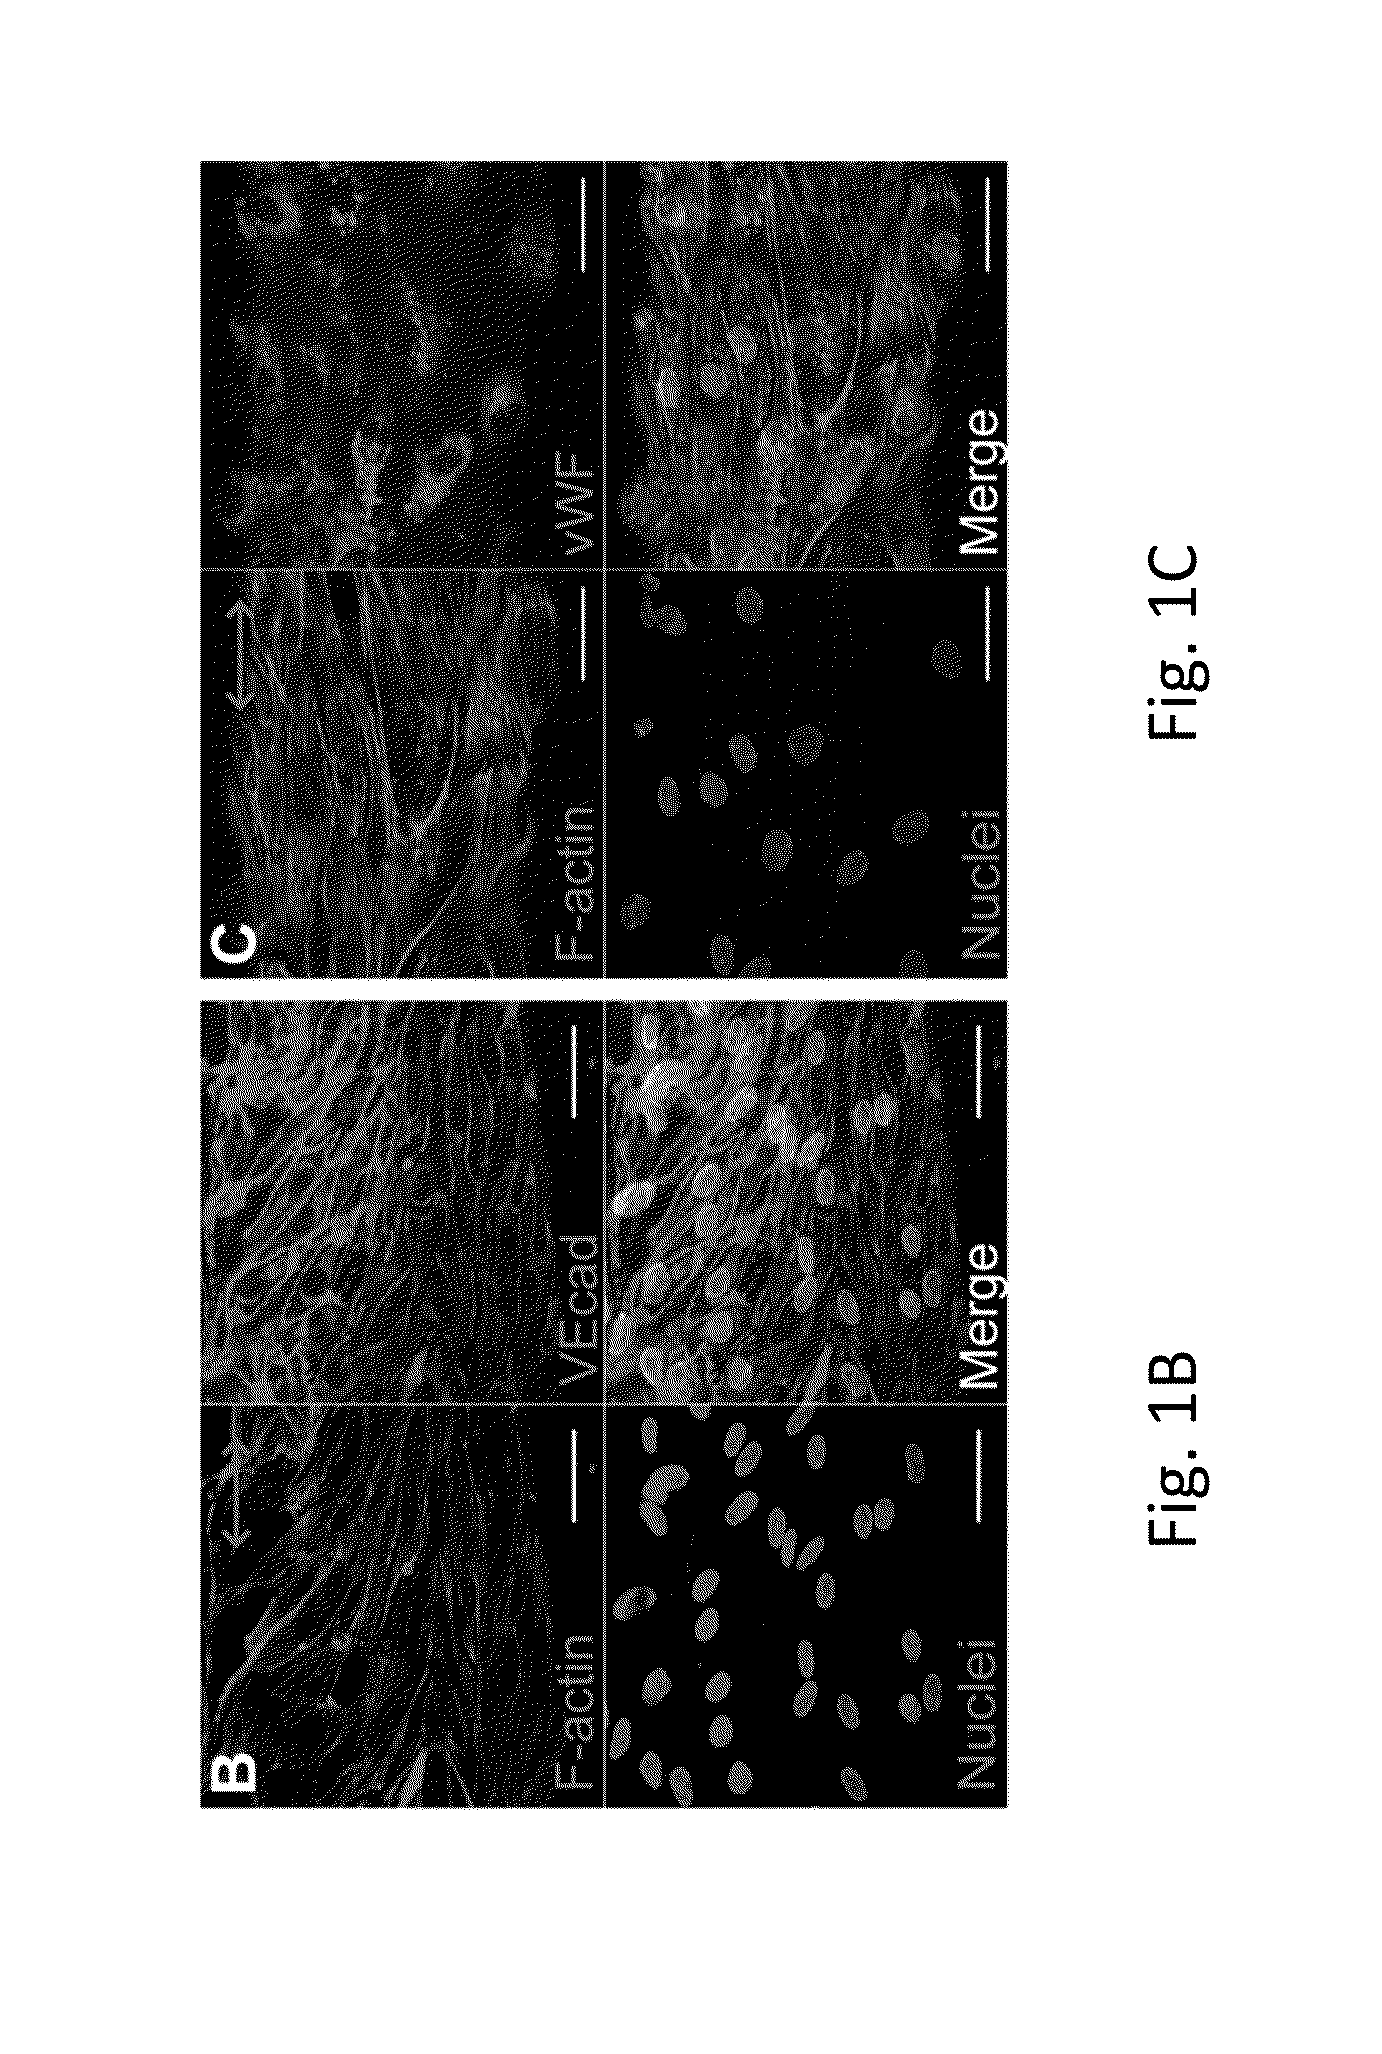 Electrostretched polymer microfibers for microvasculature development